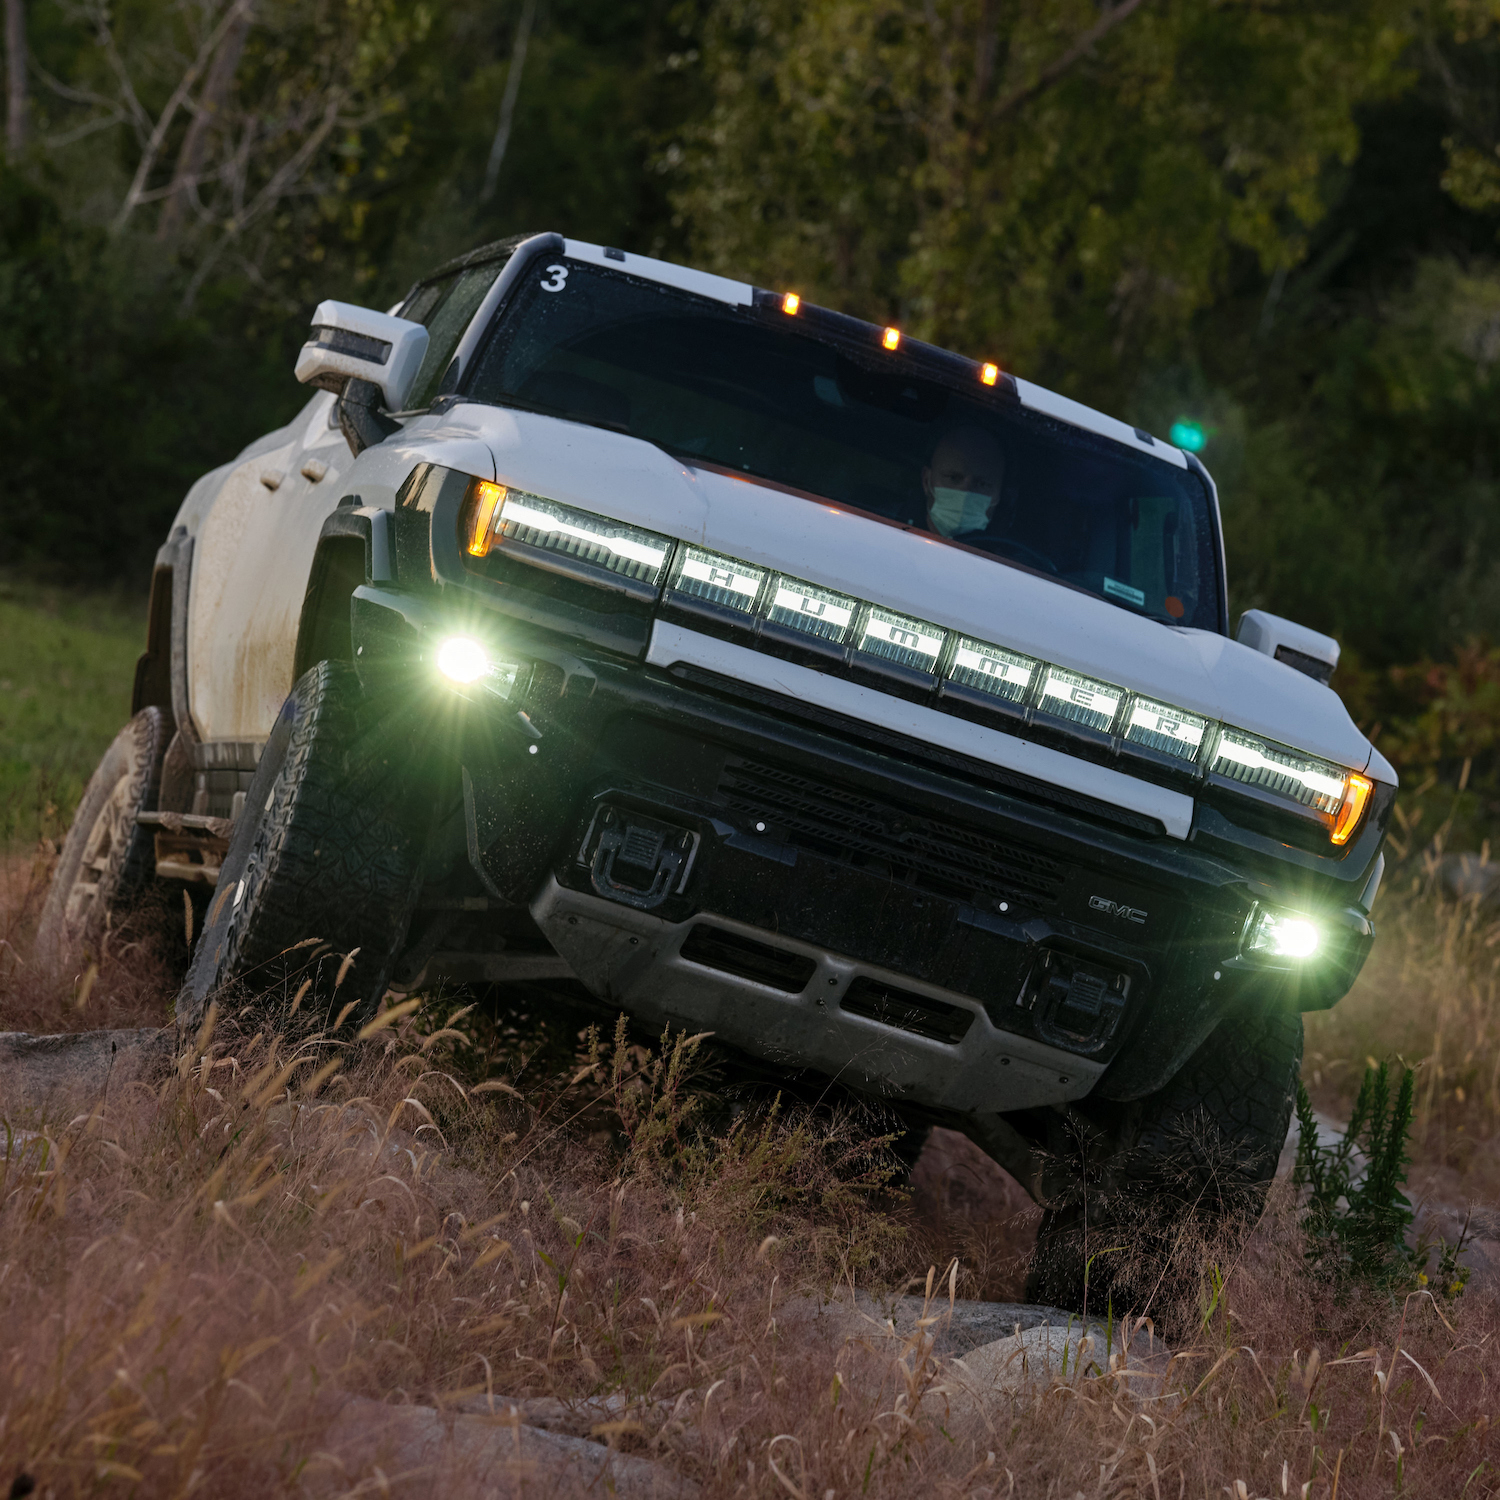 This is the GMC Hummer EV off-roading at an angle during General Motors' testing. Jay Leno called the electric truck a "technological marvel" | Steve Fecht via GMC